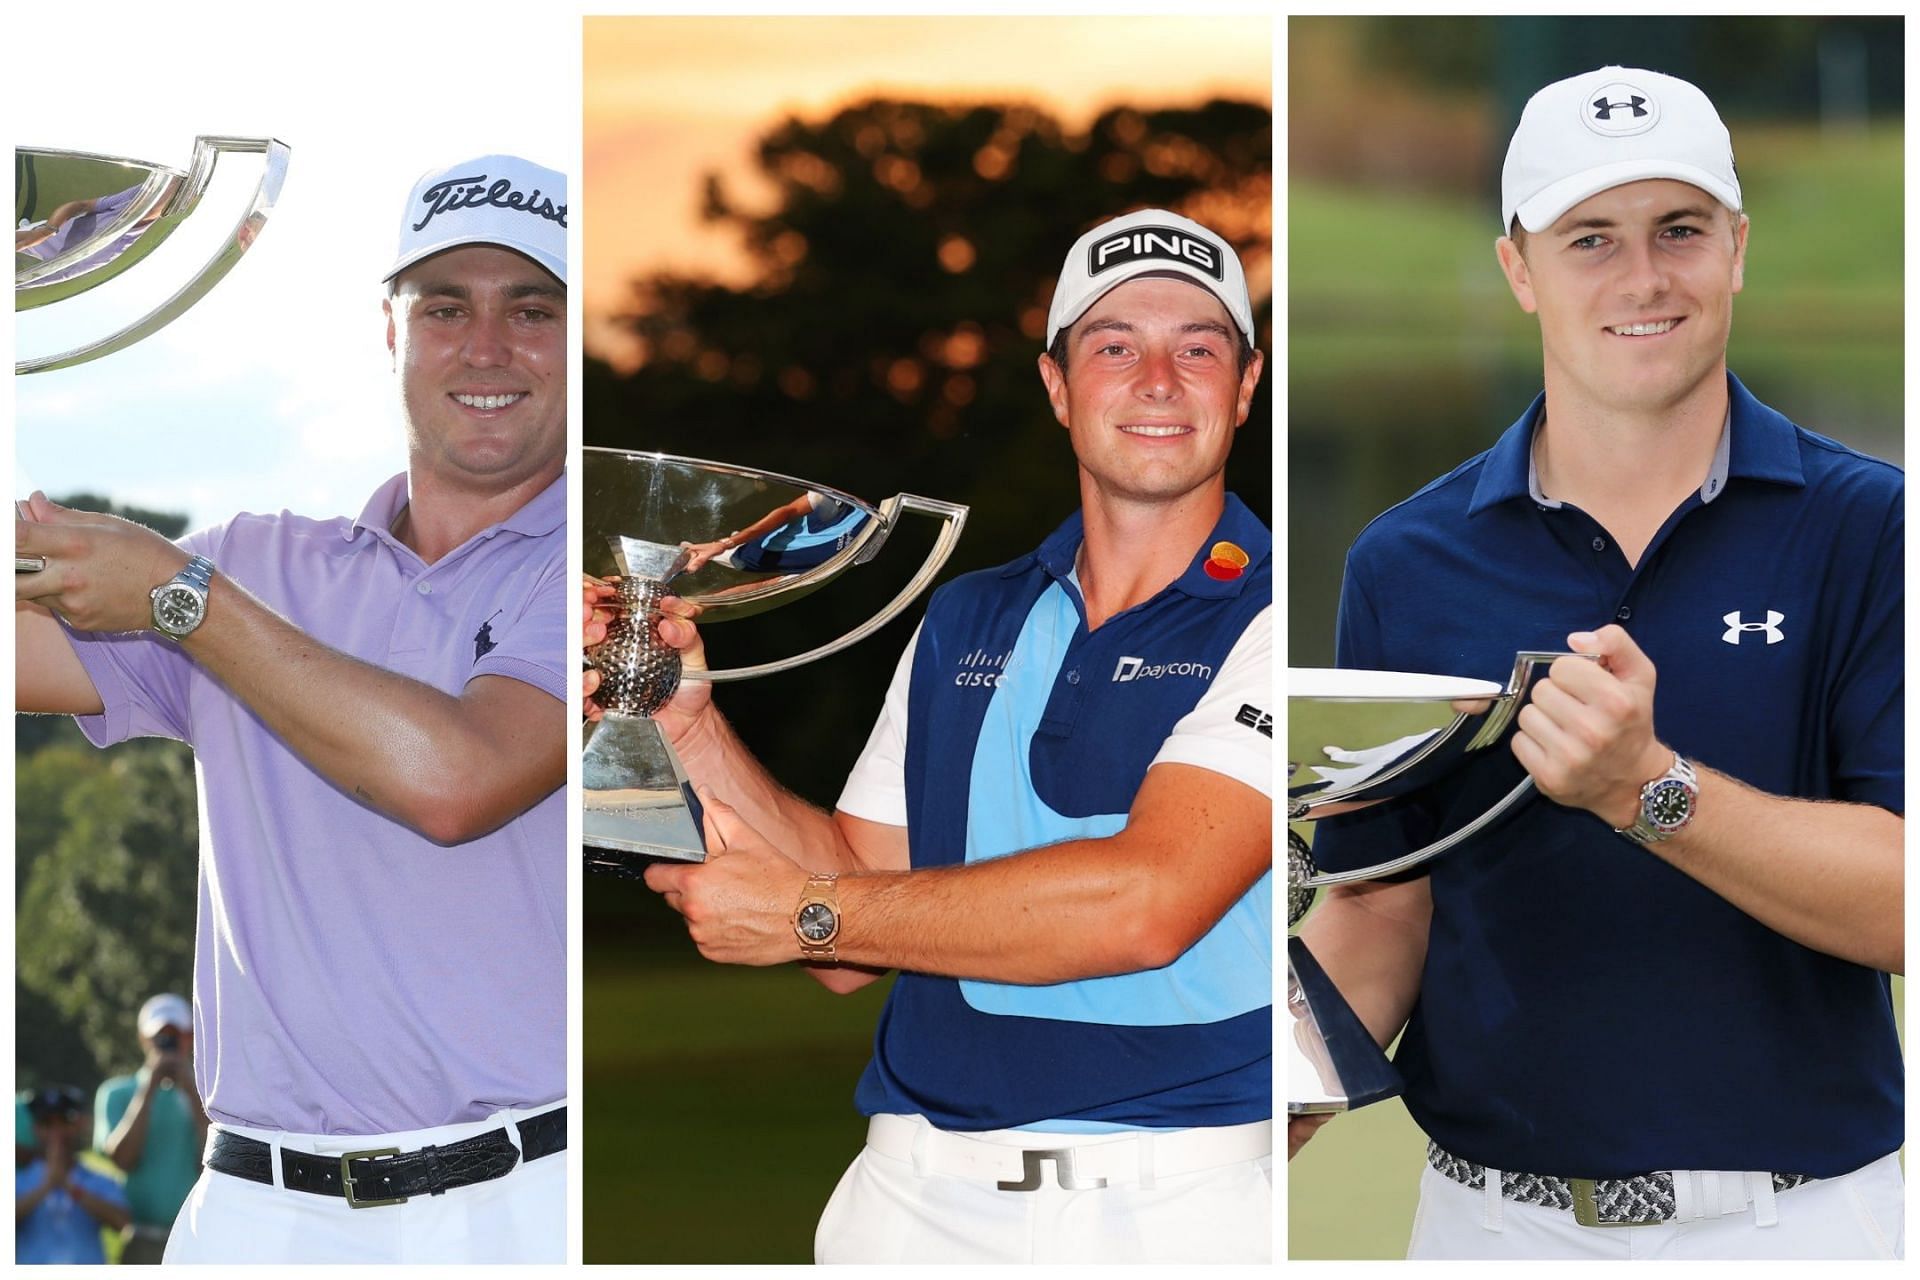 Justin Thomas, Viktor Hovland and Jordan Spieth are the youngest golfers to win the FedEx Cup